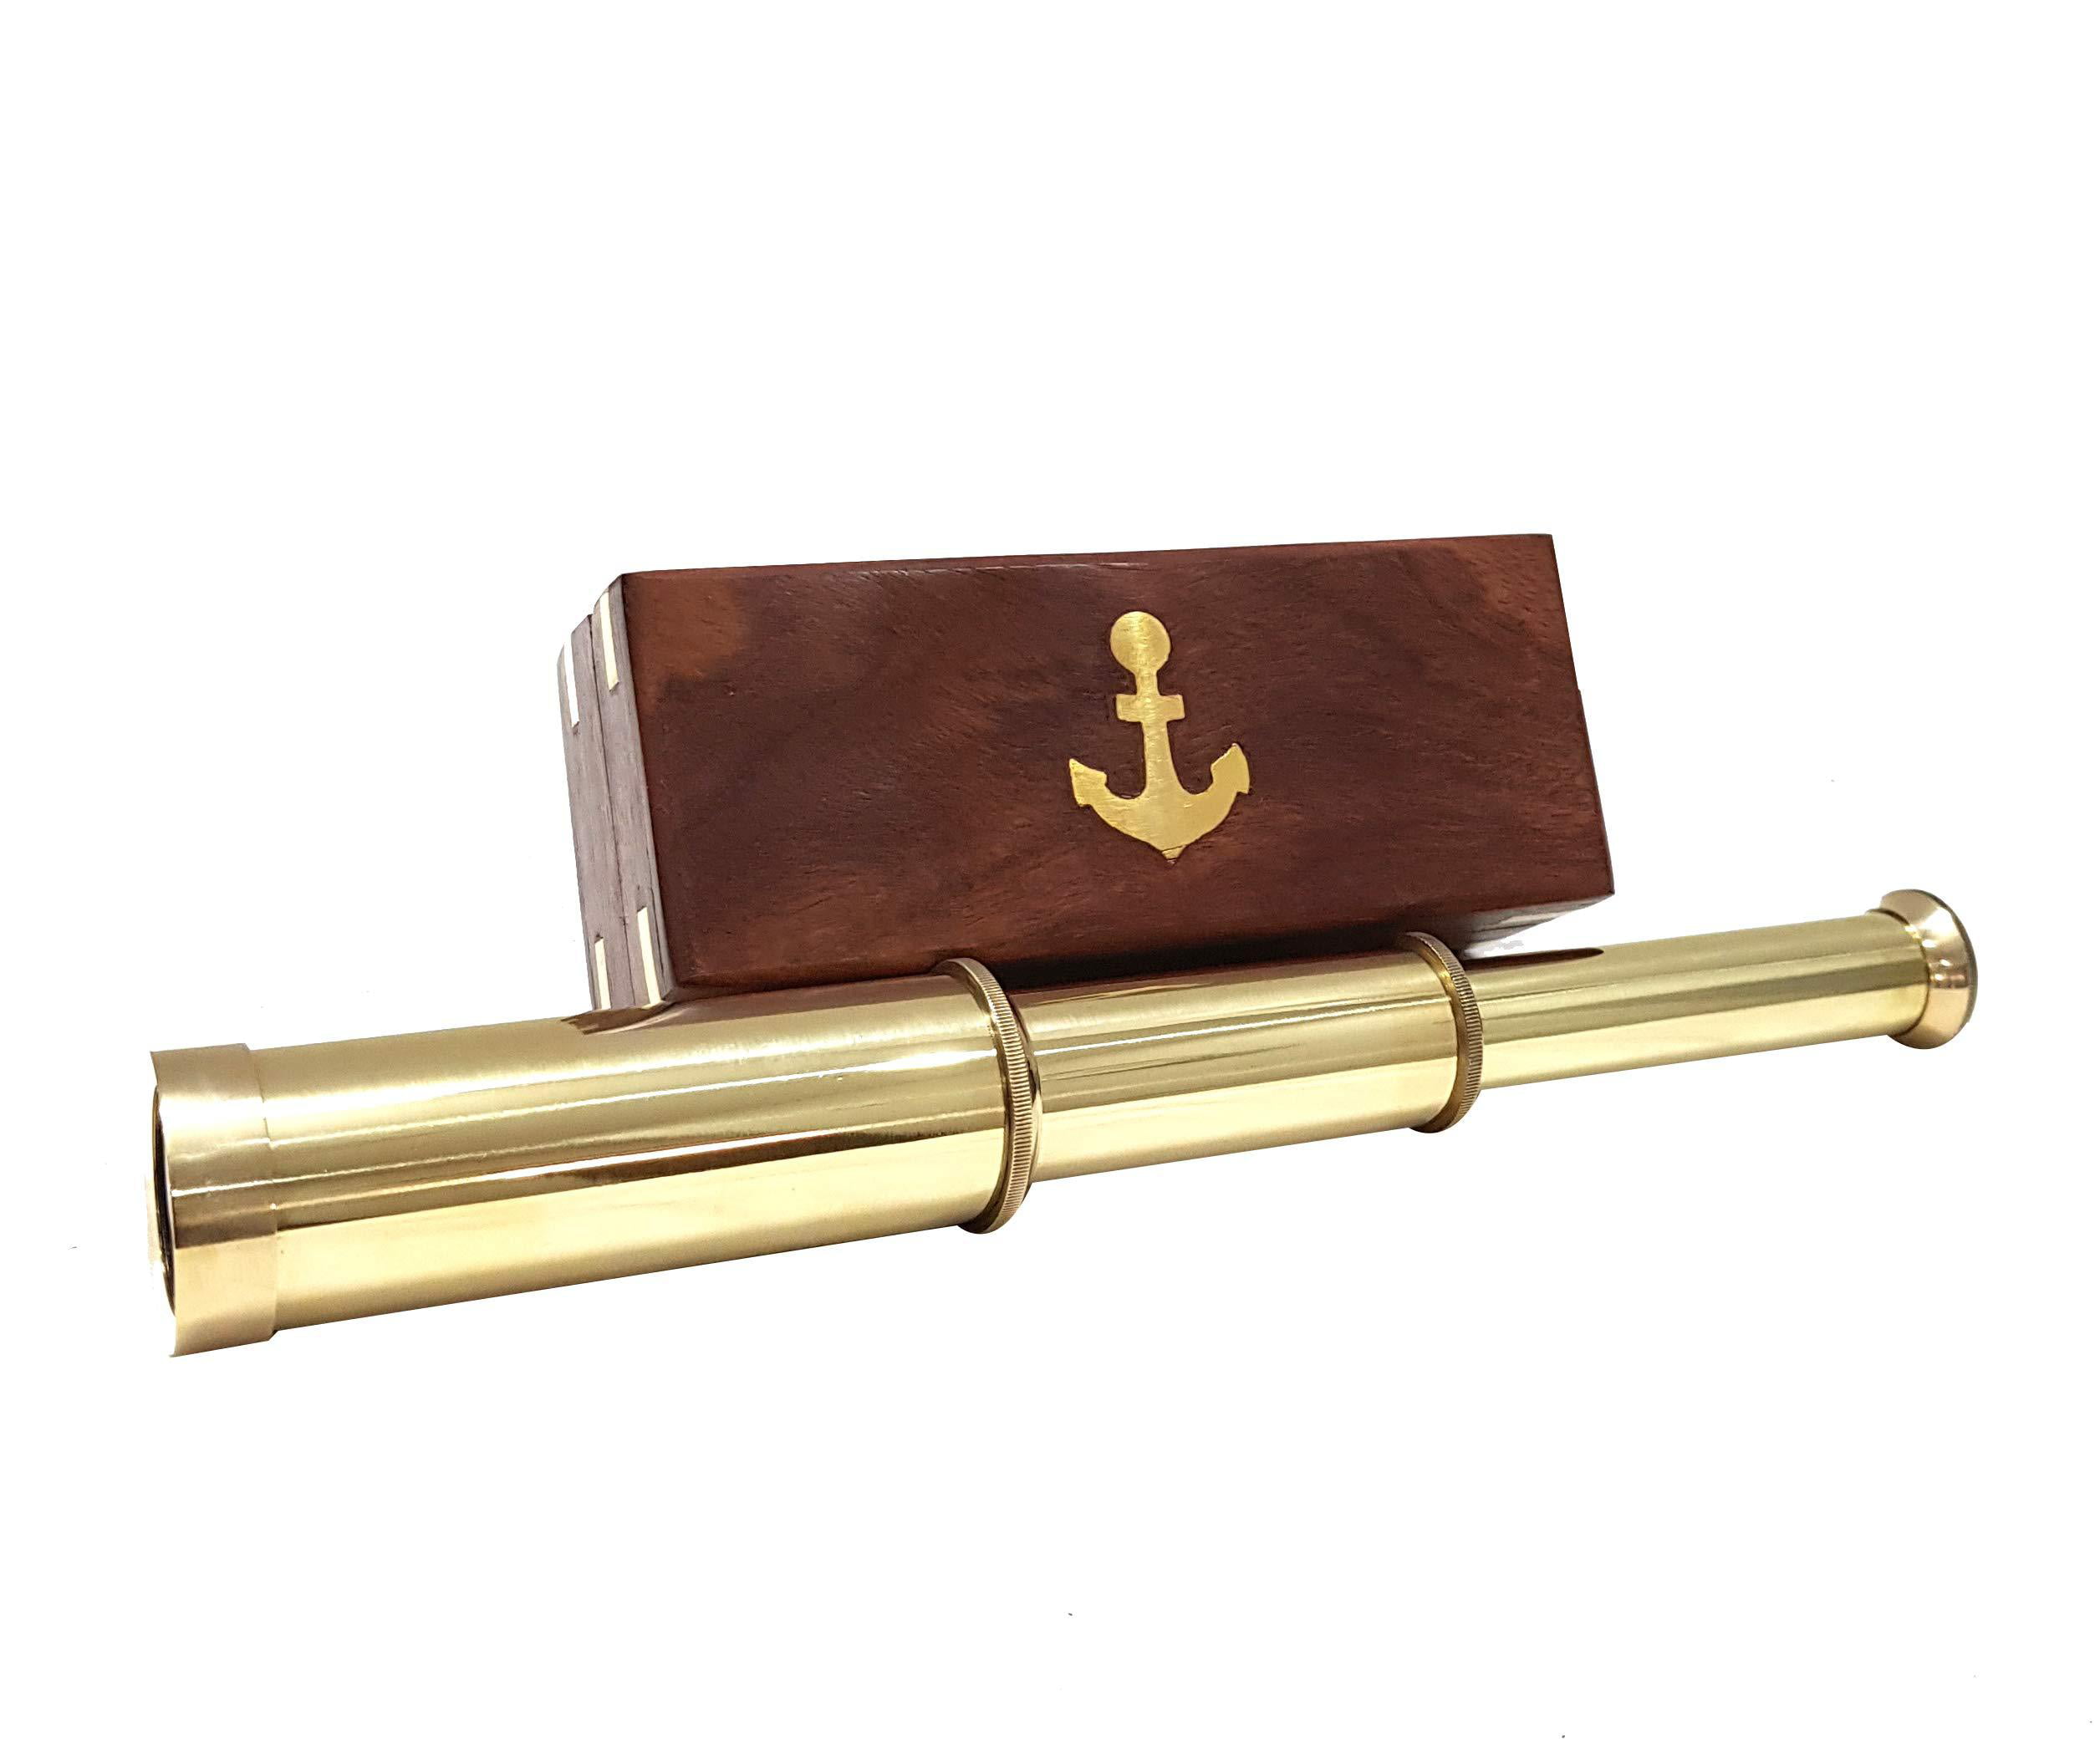 Collectibles Buy Royal Nautical Telescope Shiny Brass Kelvin Marine Brass Telescopes Unique Gifts Items 